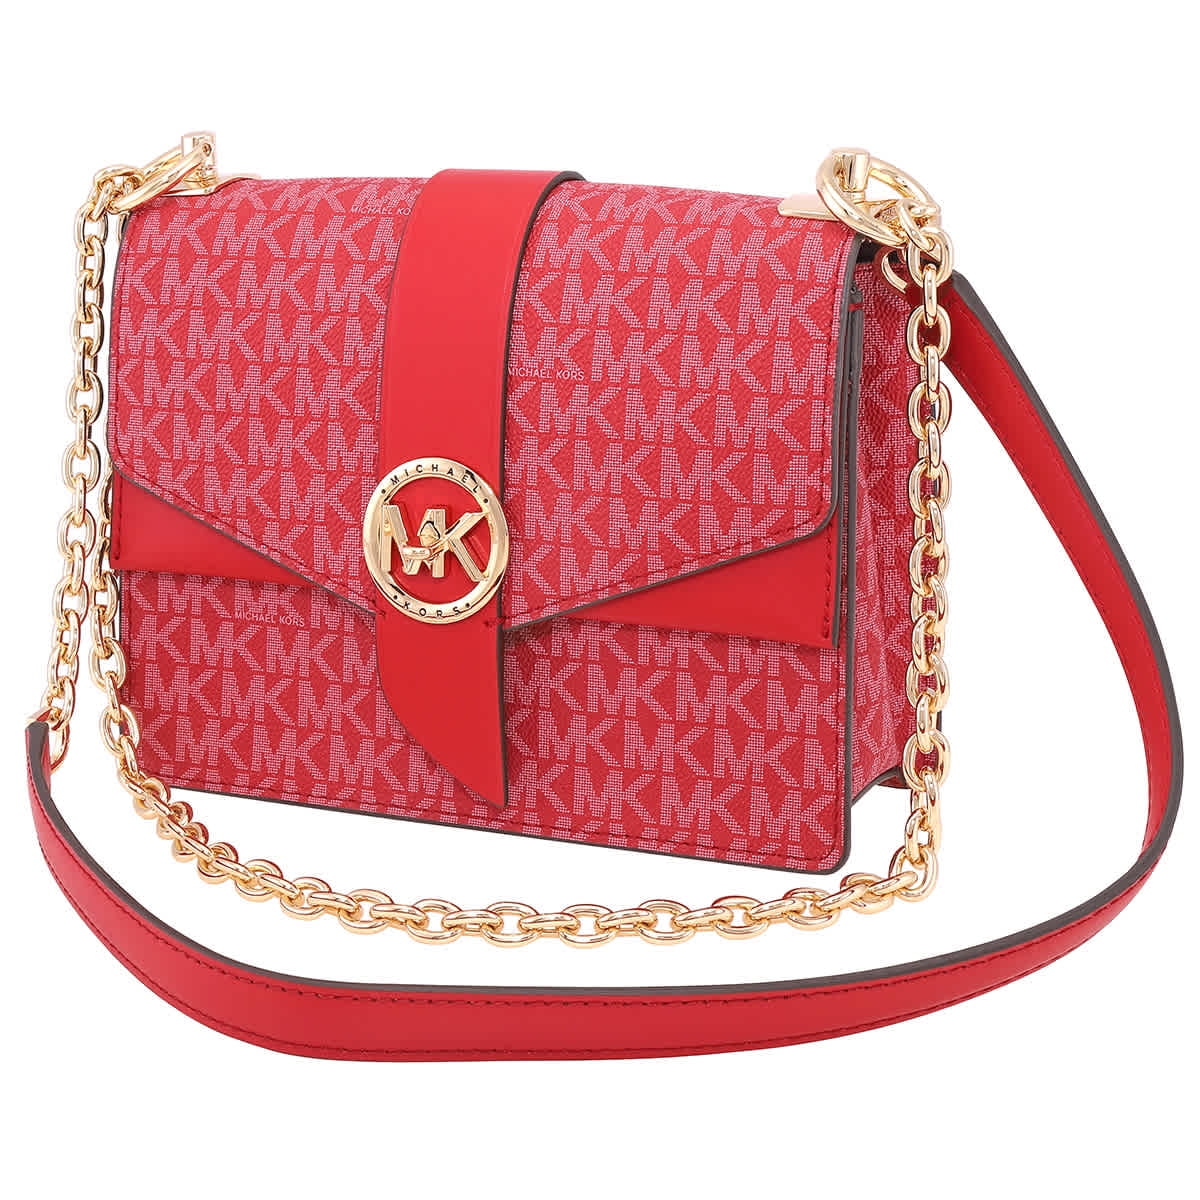 Michael Kors Small Greenwich Saffiano Leather Crossbody in Pink